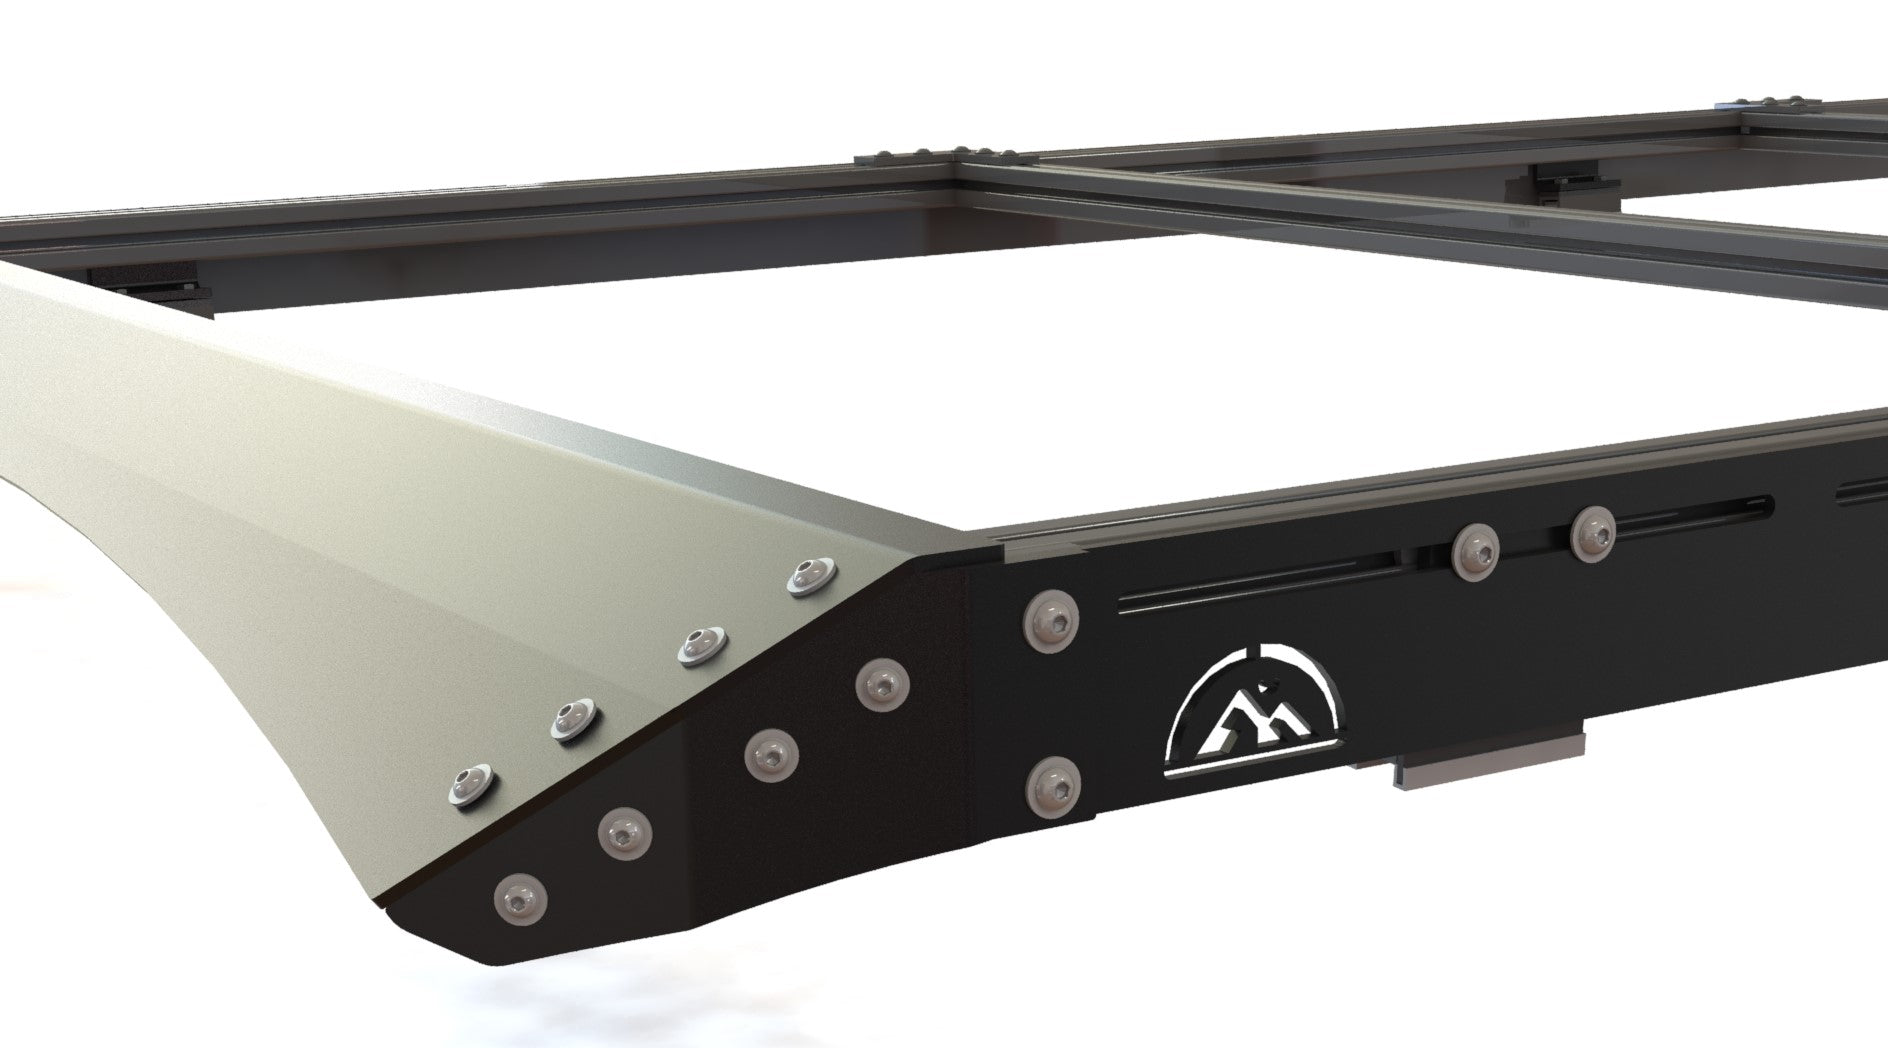 Ram Promaster Roof Rack -  56.75" 8020 TO HSLD - UPGRADE KIT (this is not a full roof rack)